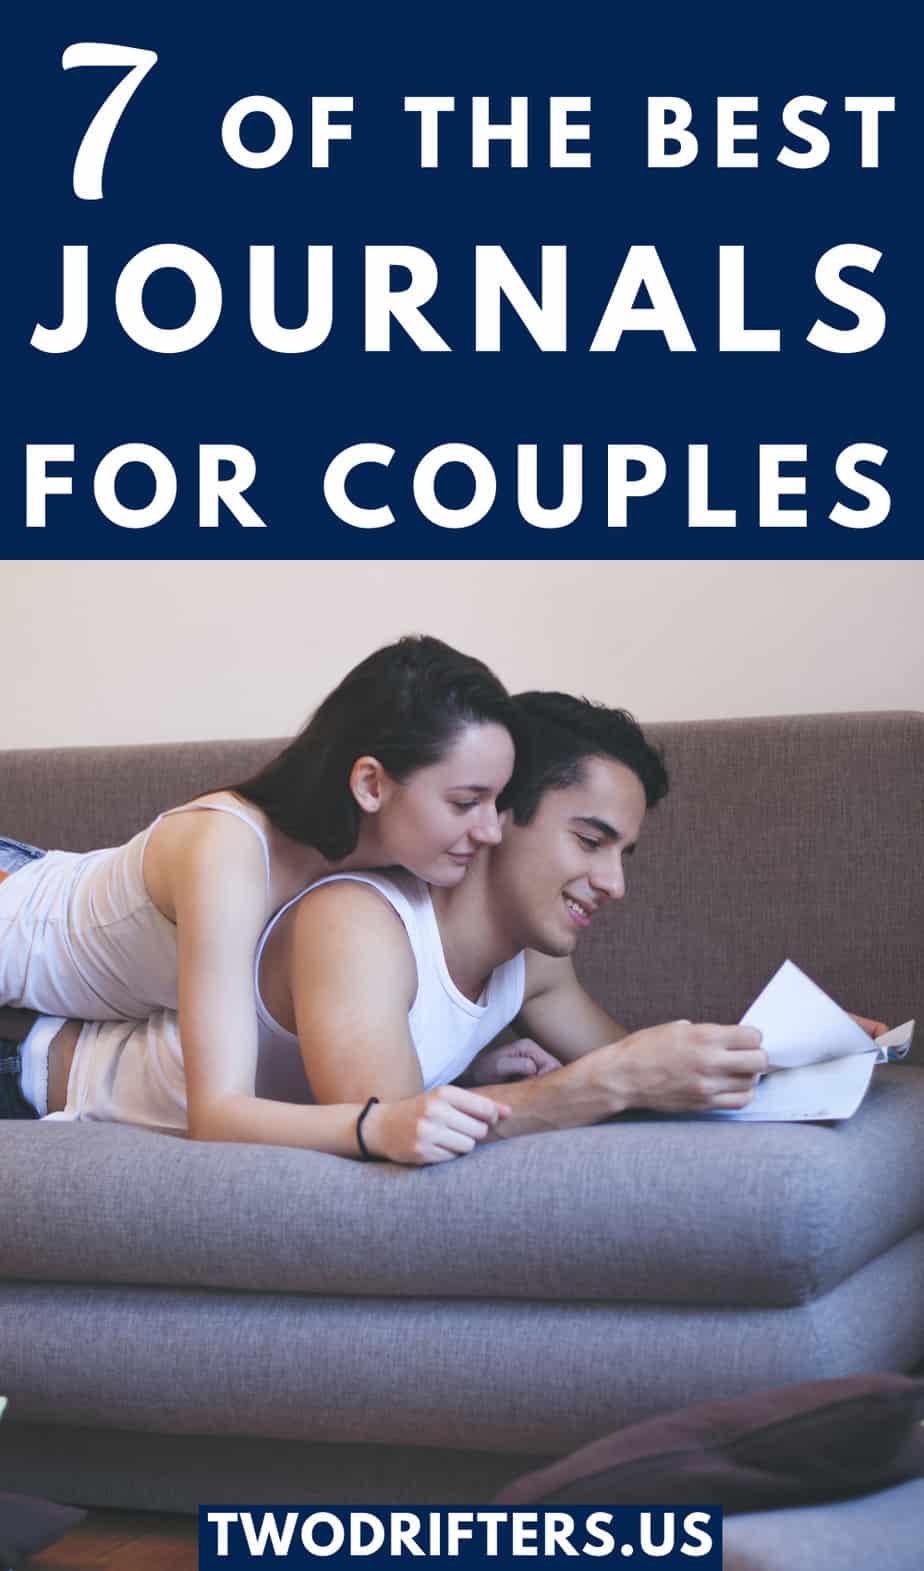 Pinterest social image that says “7 of the best journals for couples.”